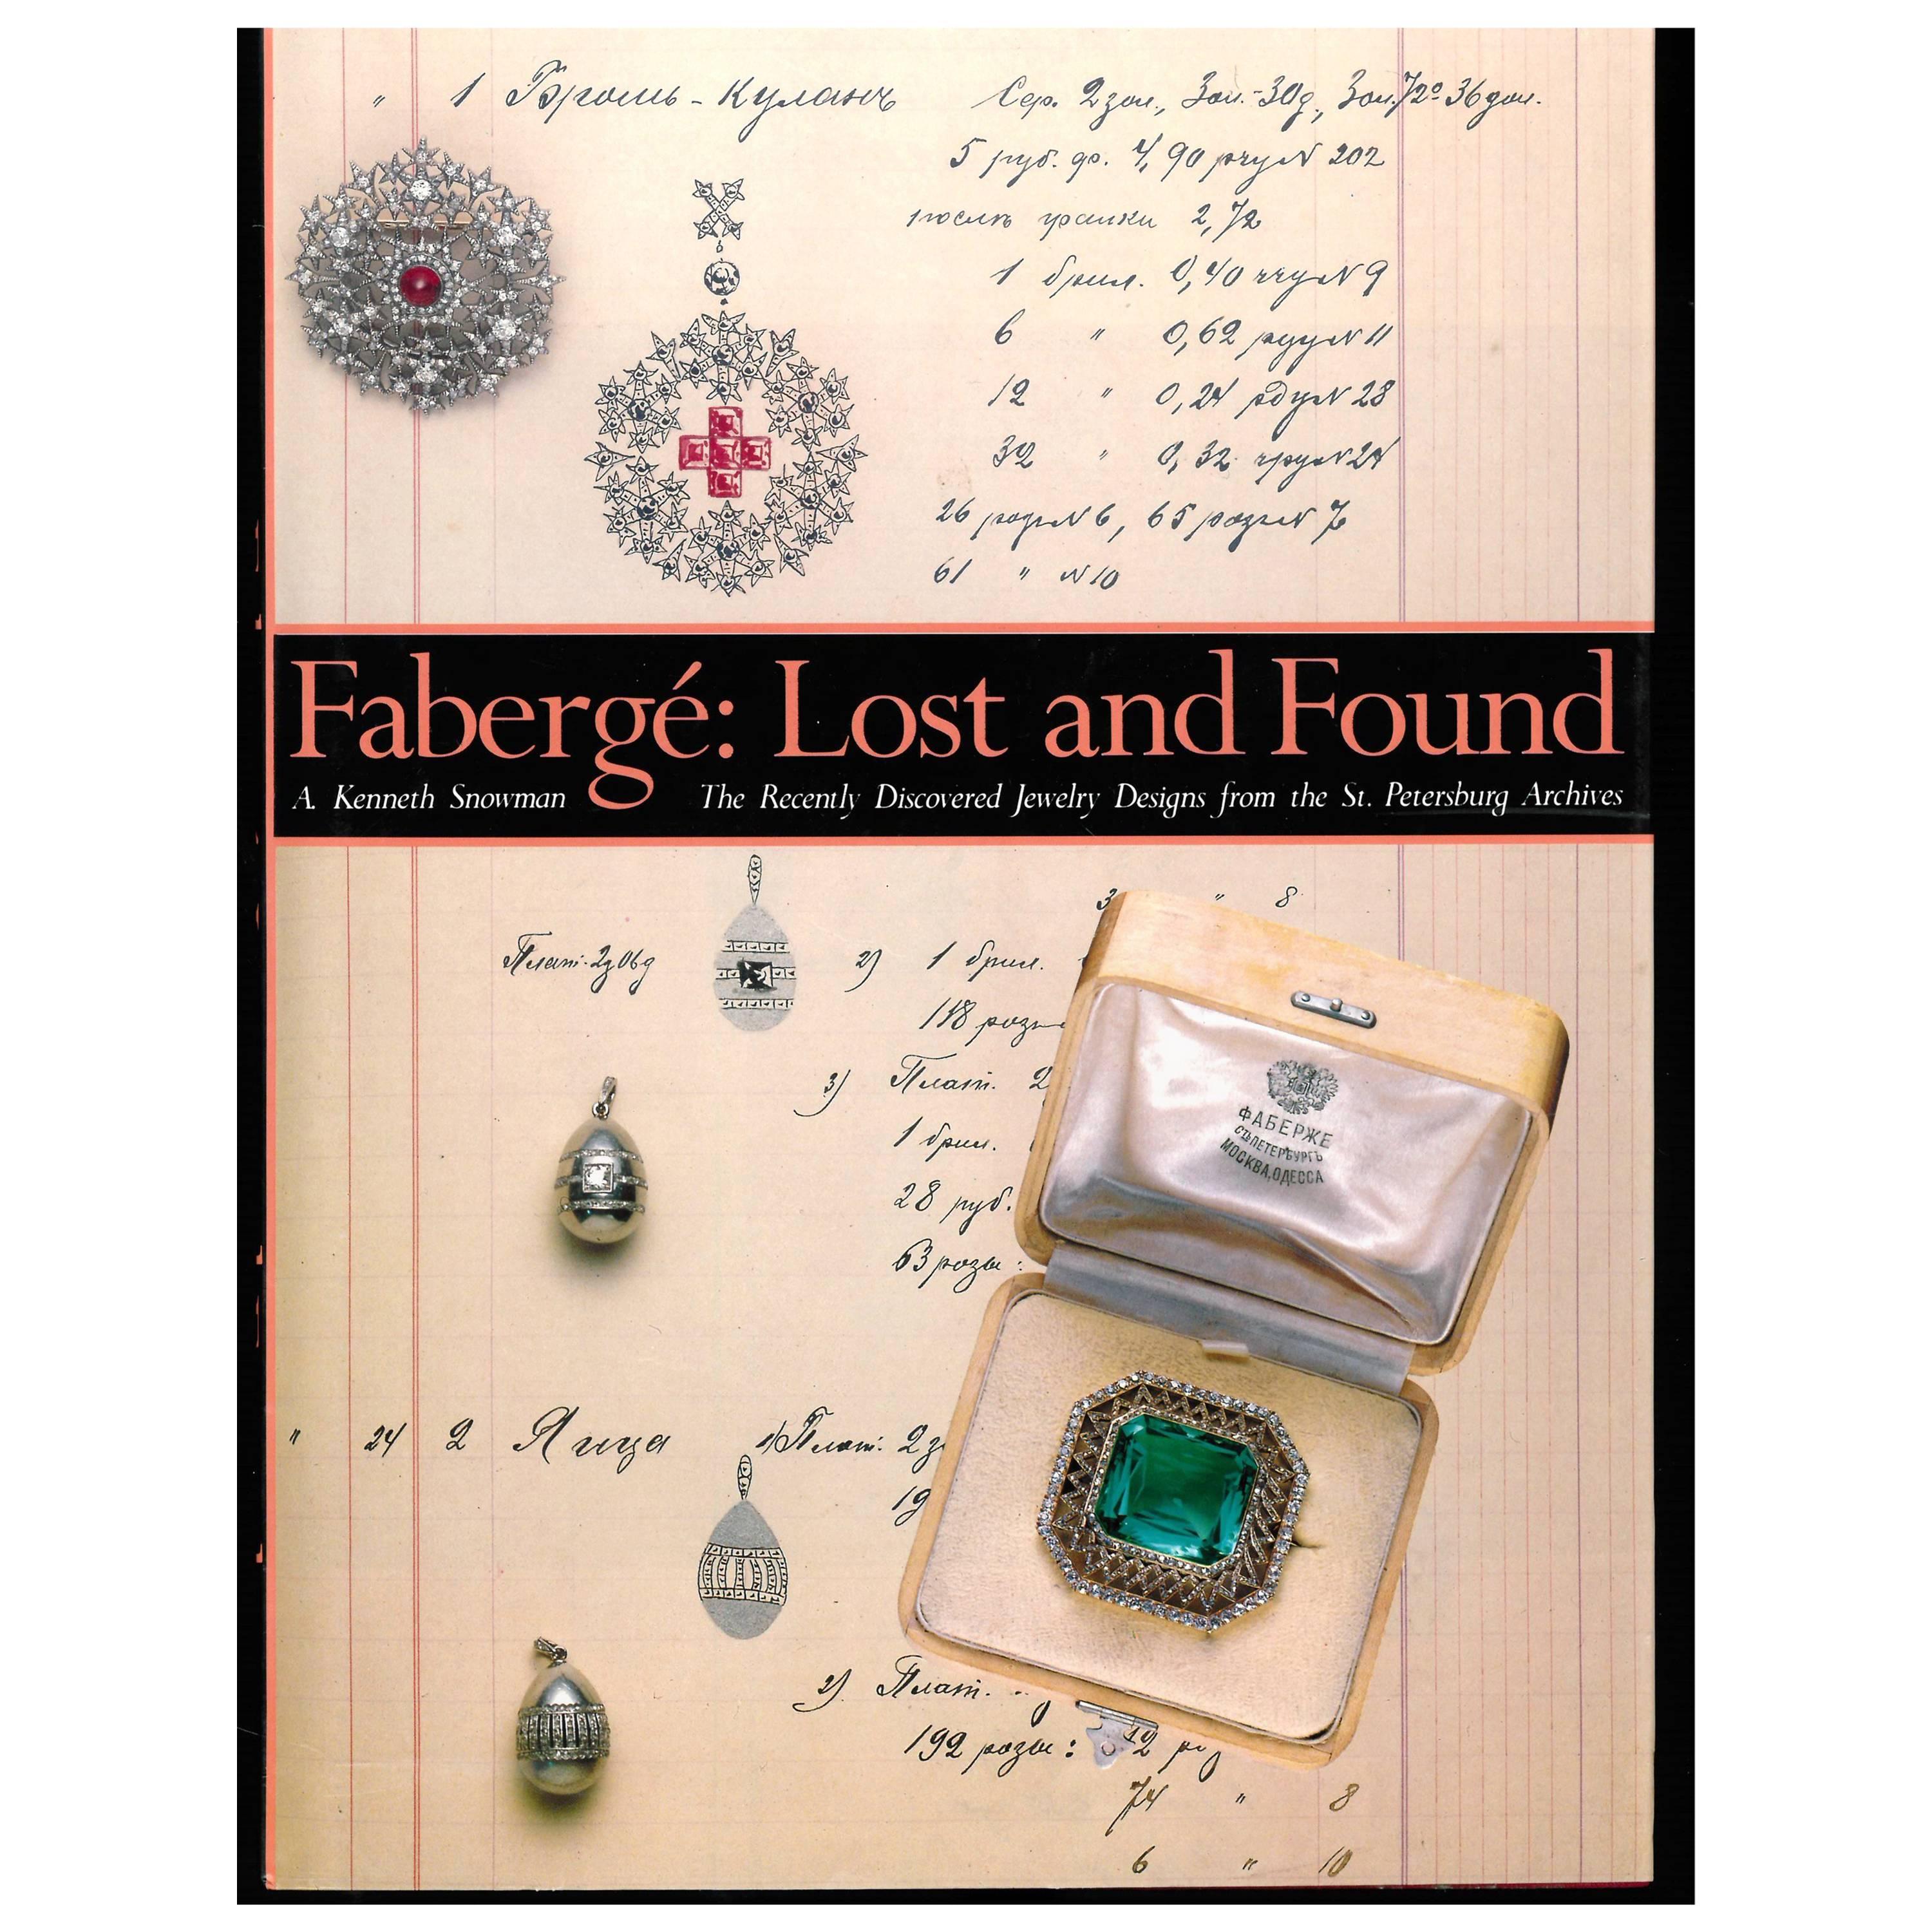 "Faberge: Lost and Found" Book